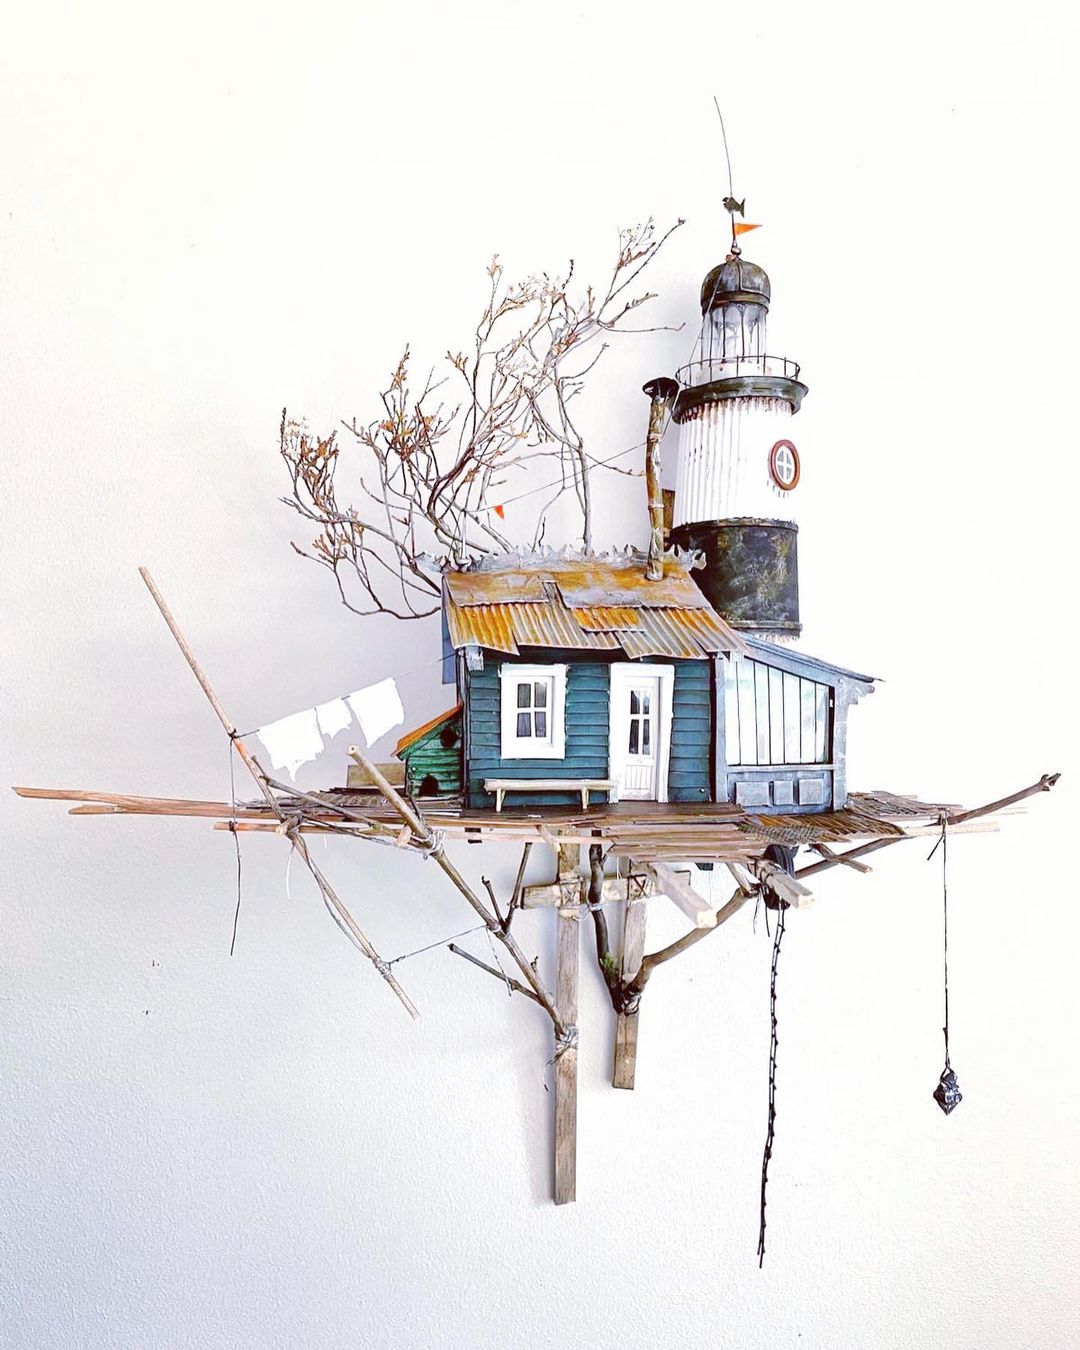 Miniature Ramshackle Cabins By David Mansot (16)